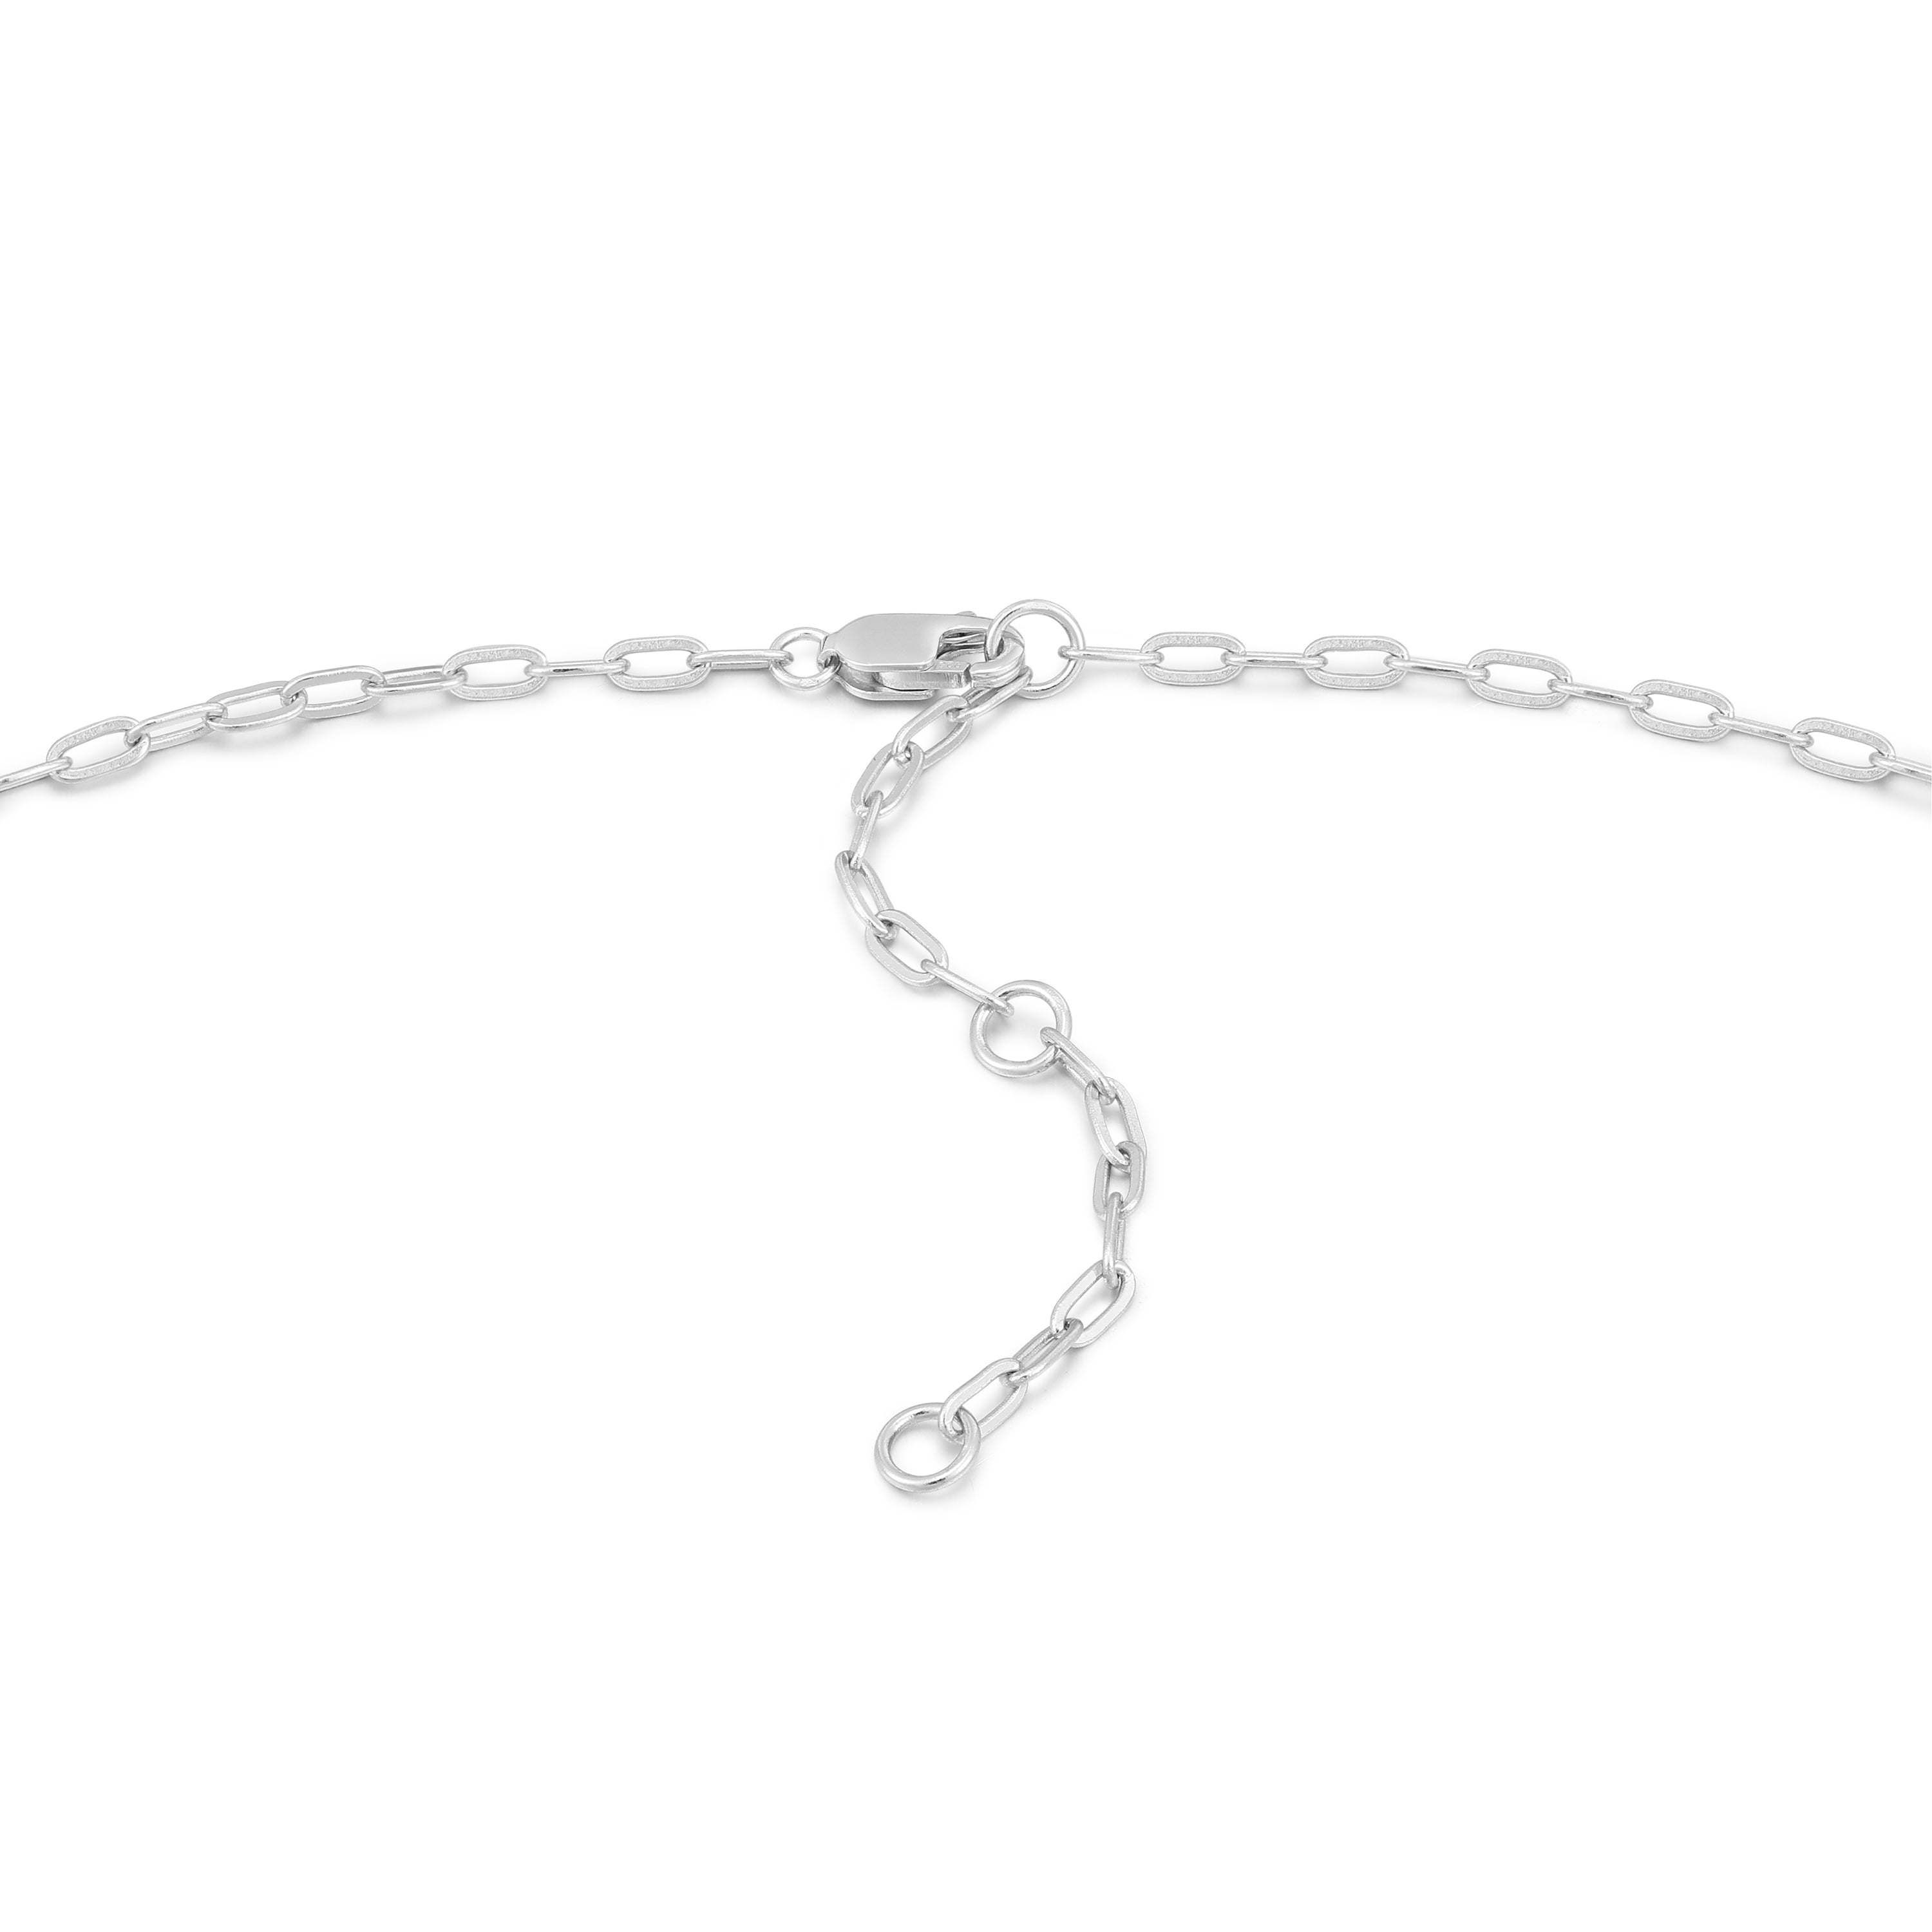 Silver Mini Link Charm Chain Connector Necklace